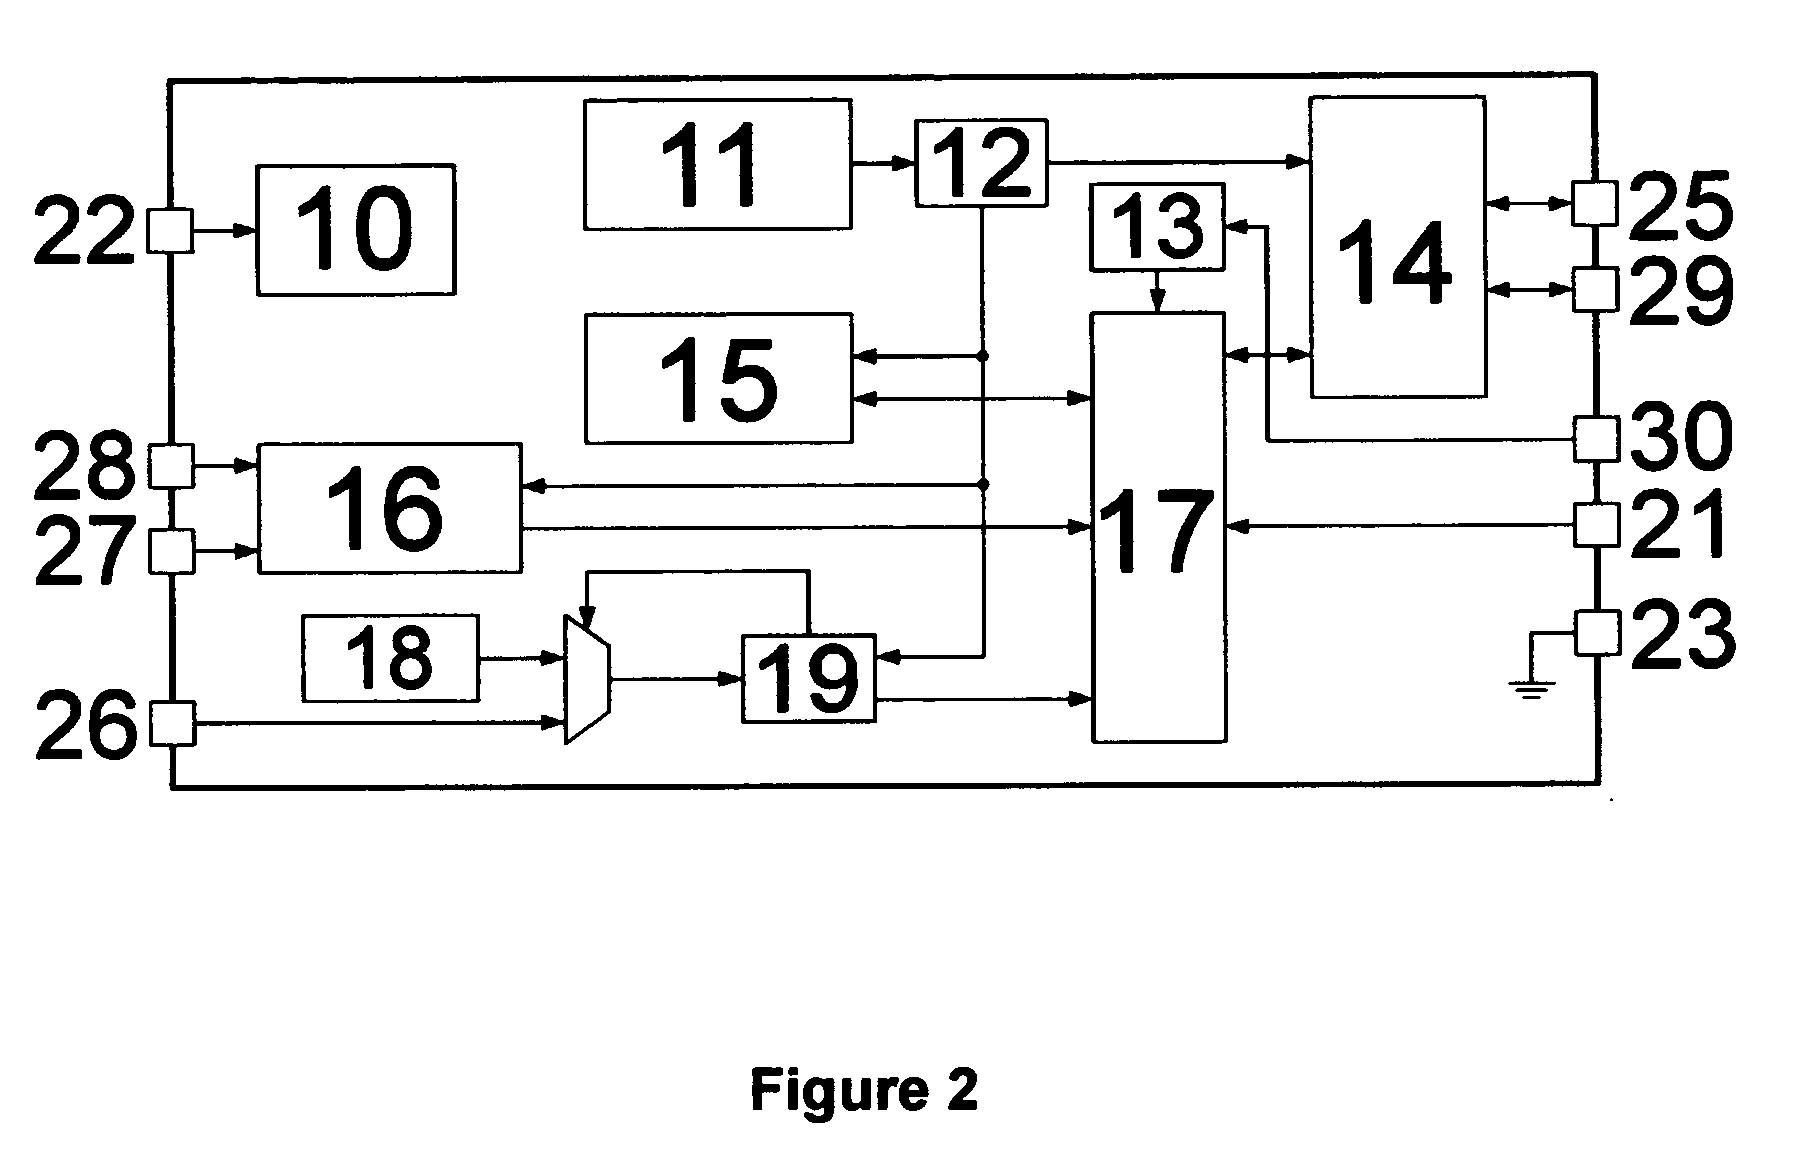 System and method for power management of energy storage devices